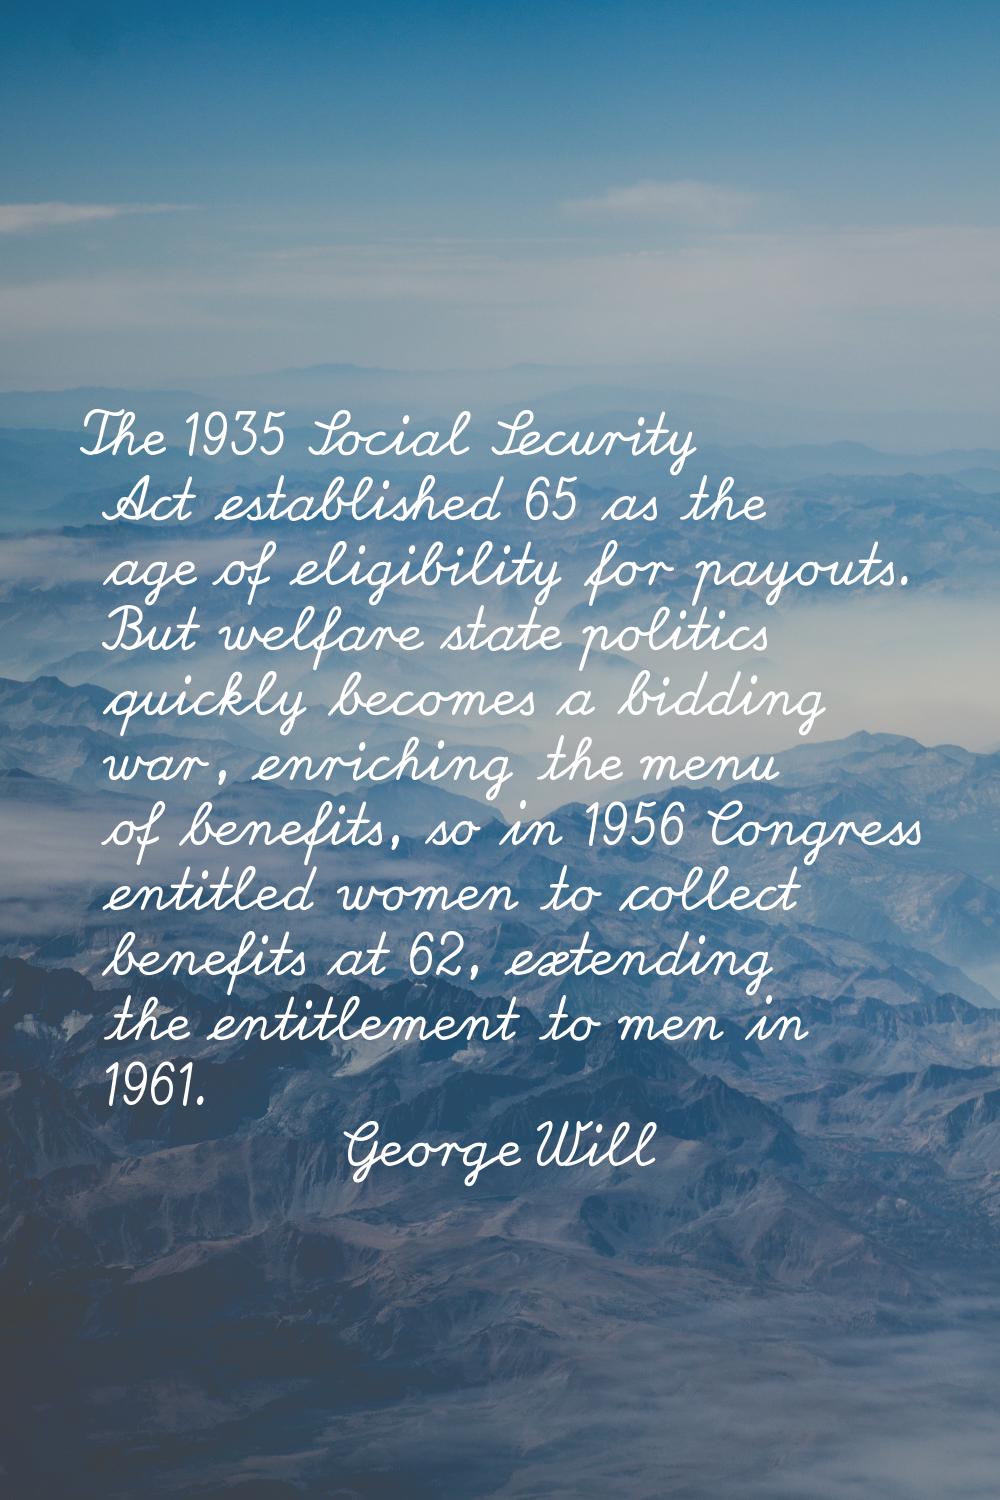 The 1935 Social Security Act established 65 as the age of eligibility for payouts. But welfare stat